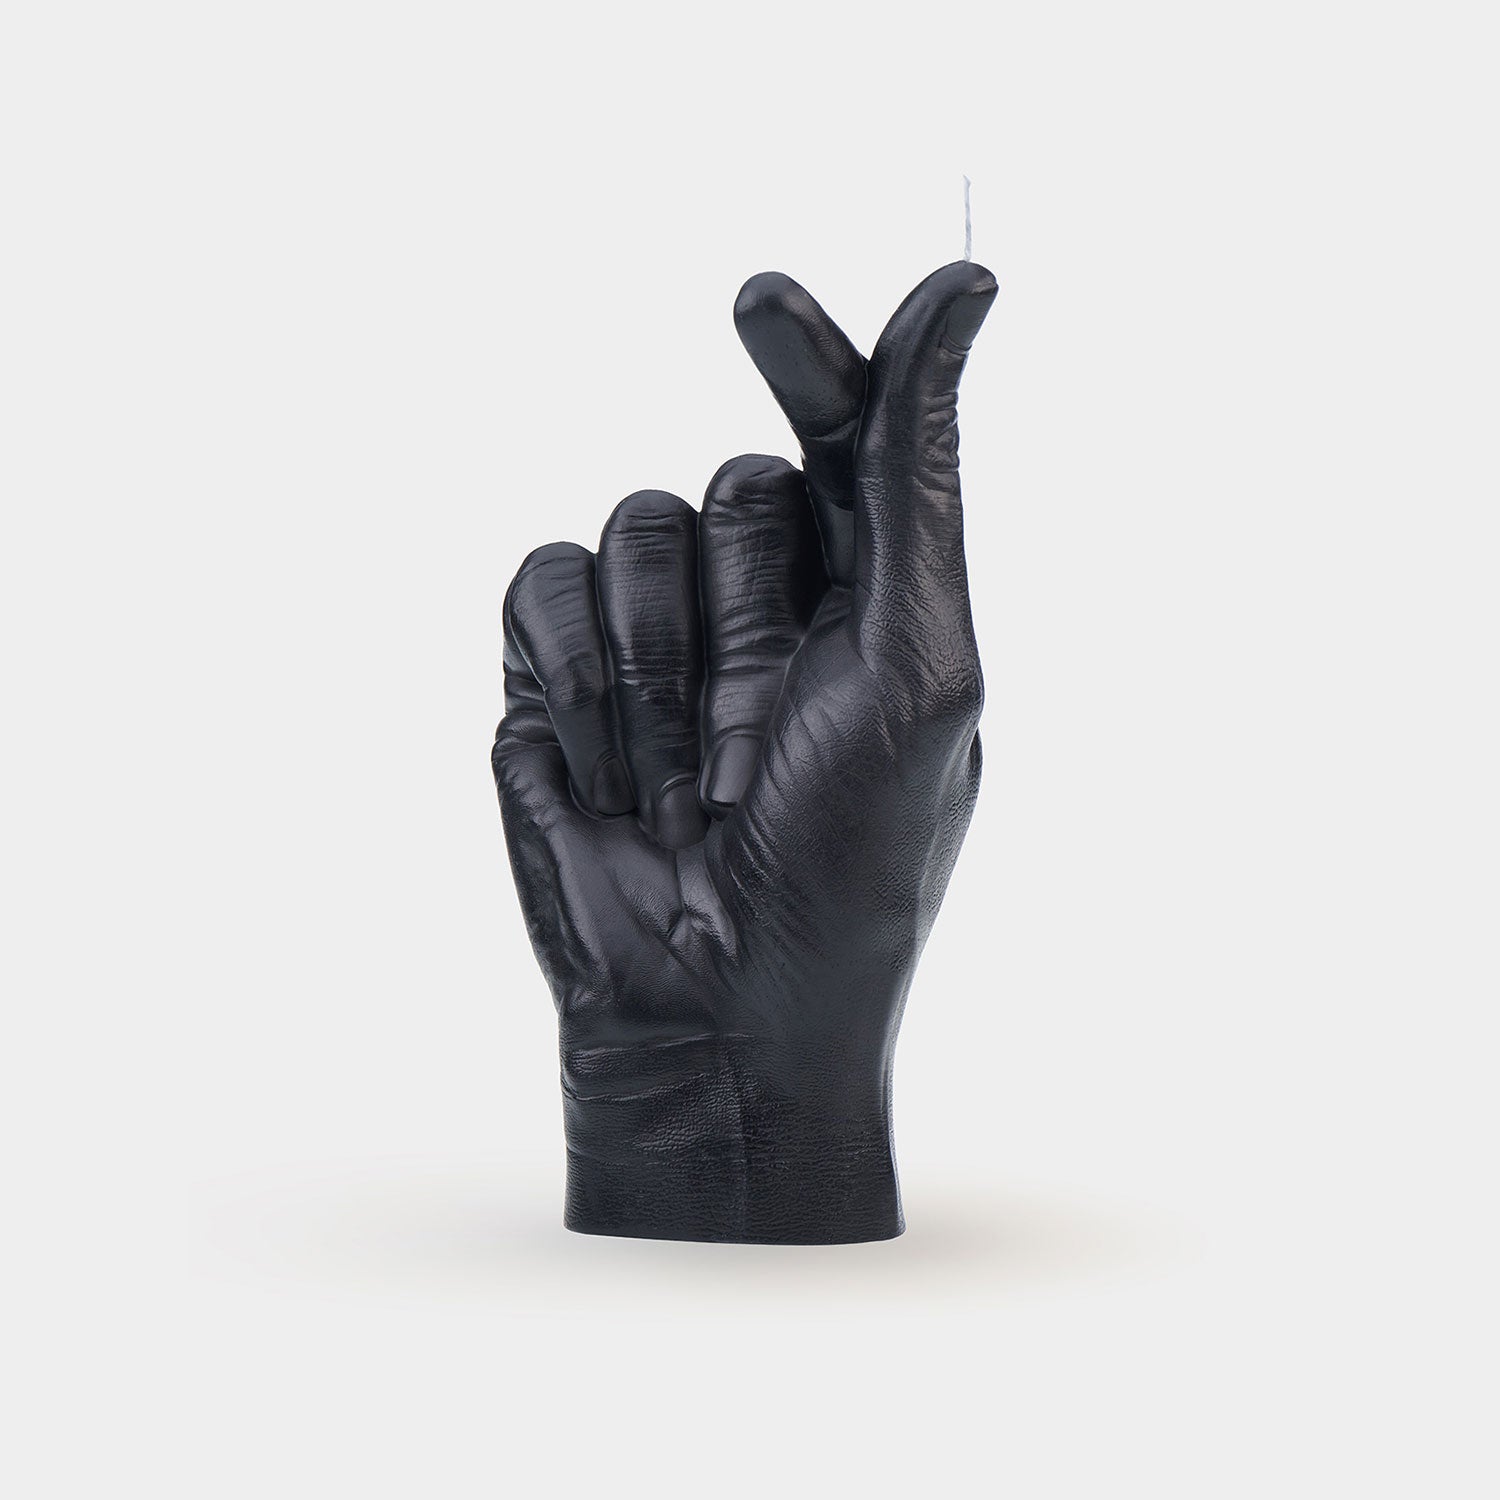 CandleHand "Finger Hearts" Candle - Black